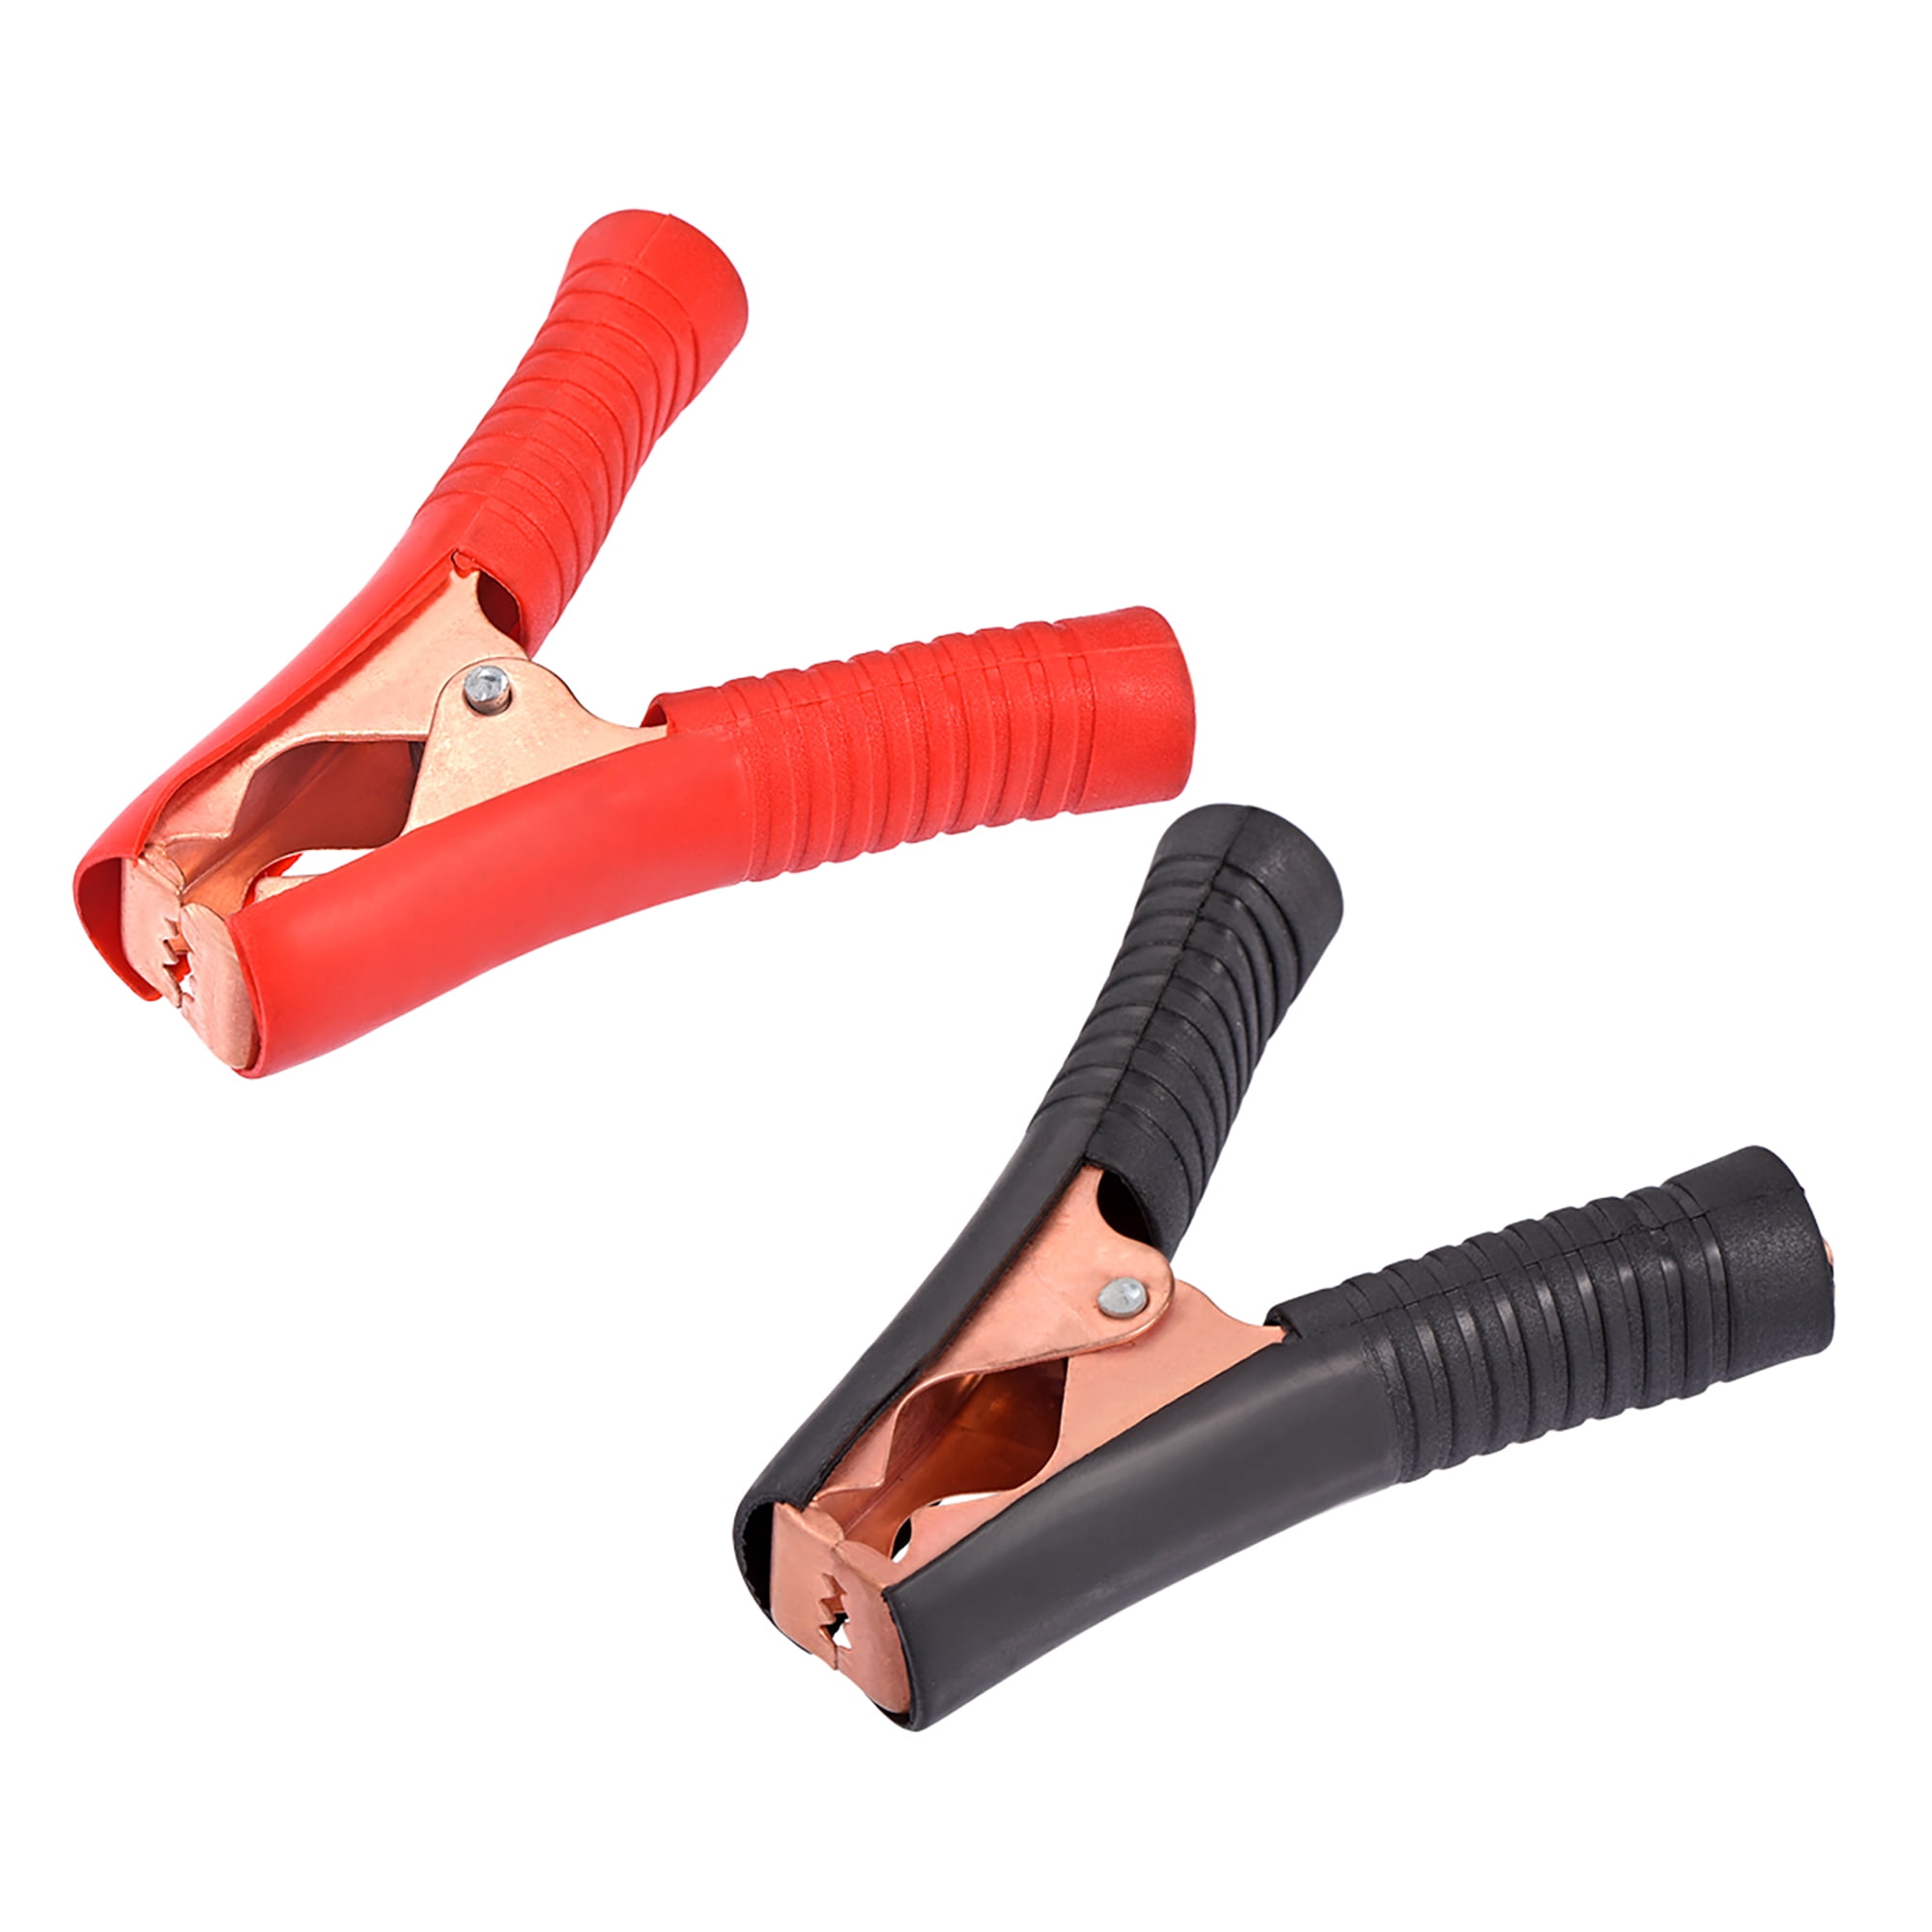 2Pcs Red&Black Car Battery Charger Clamp Alligator Clip for Jump Starter mq 